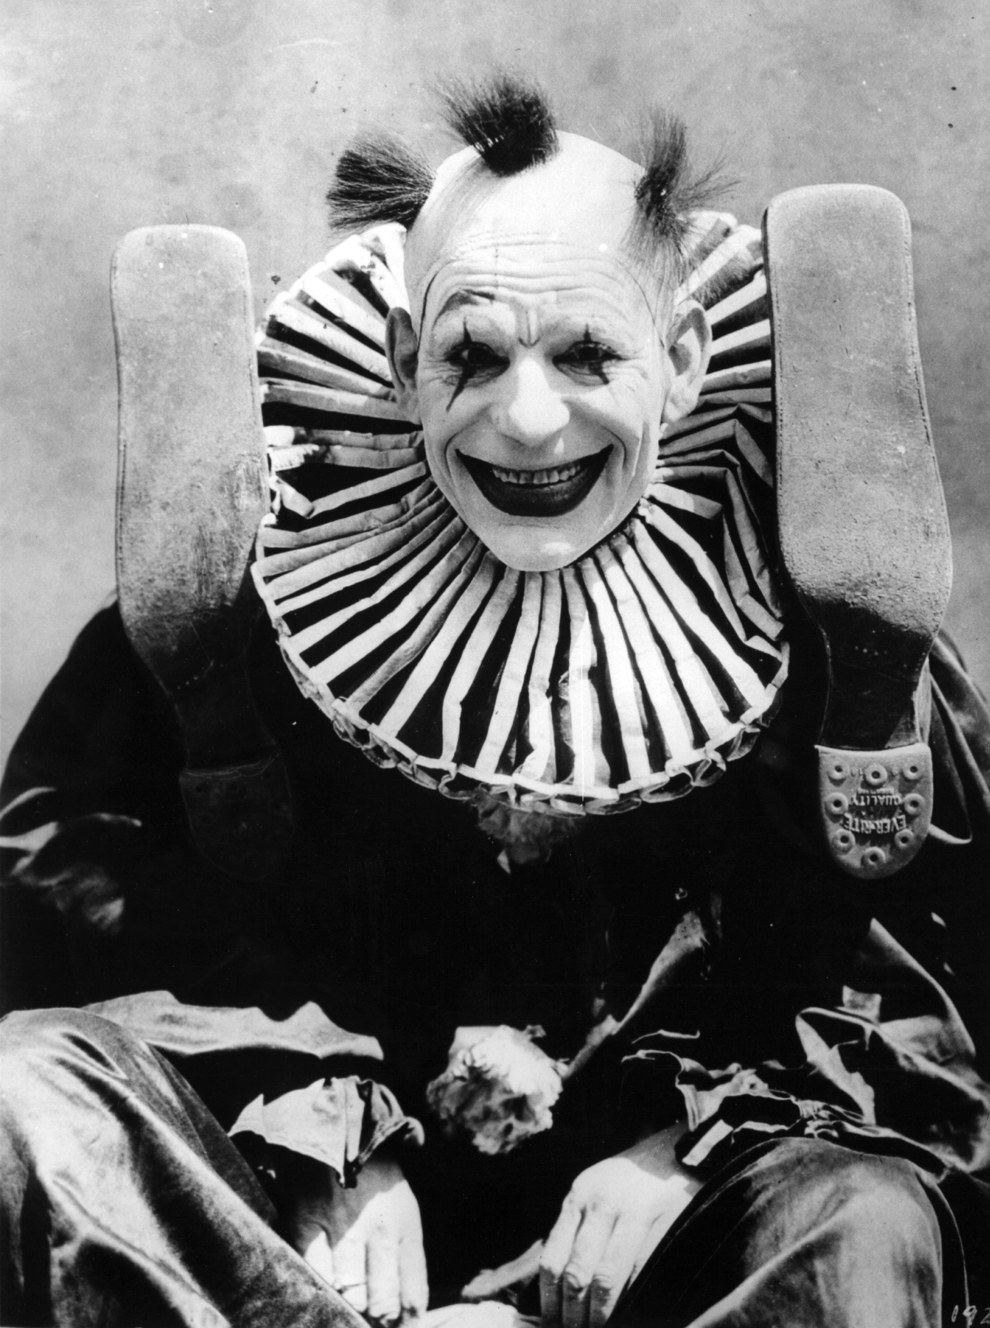 This playful clown from 1924.